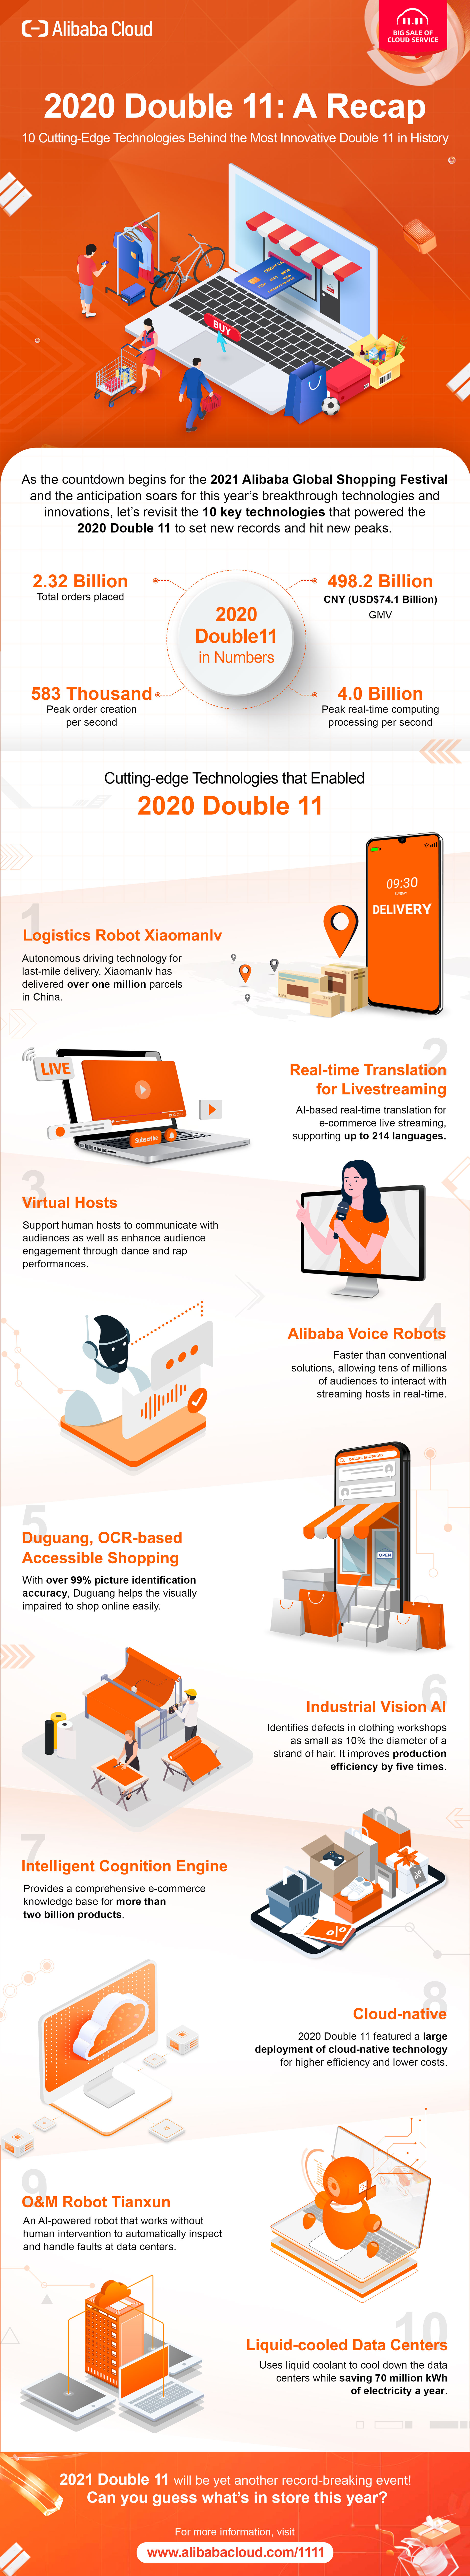 Alibaba_Cloud_Infographic_10_Key_Technologies_for_2020_Double11_TTN_V1